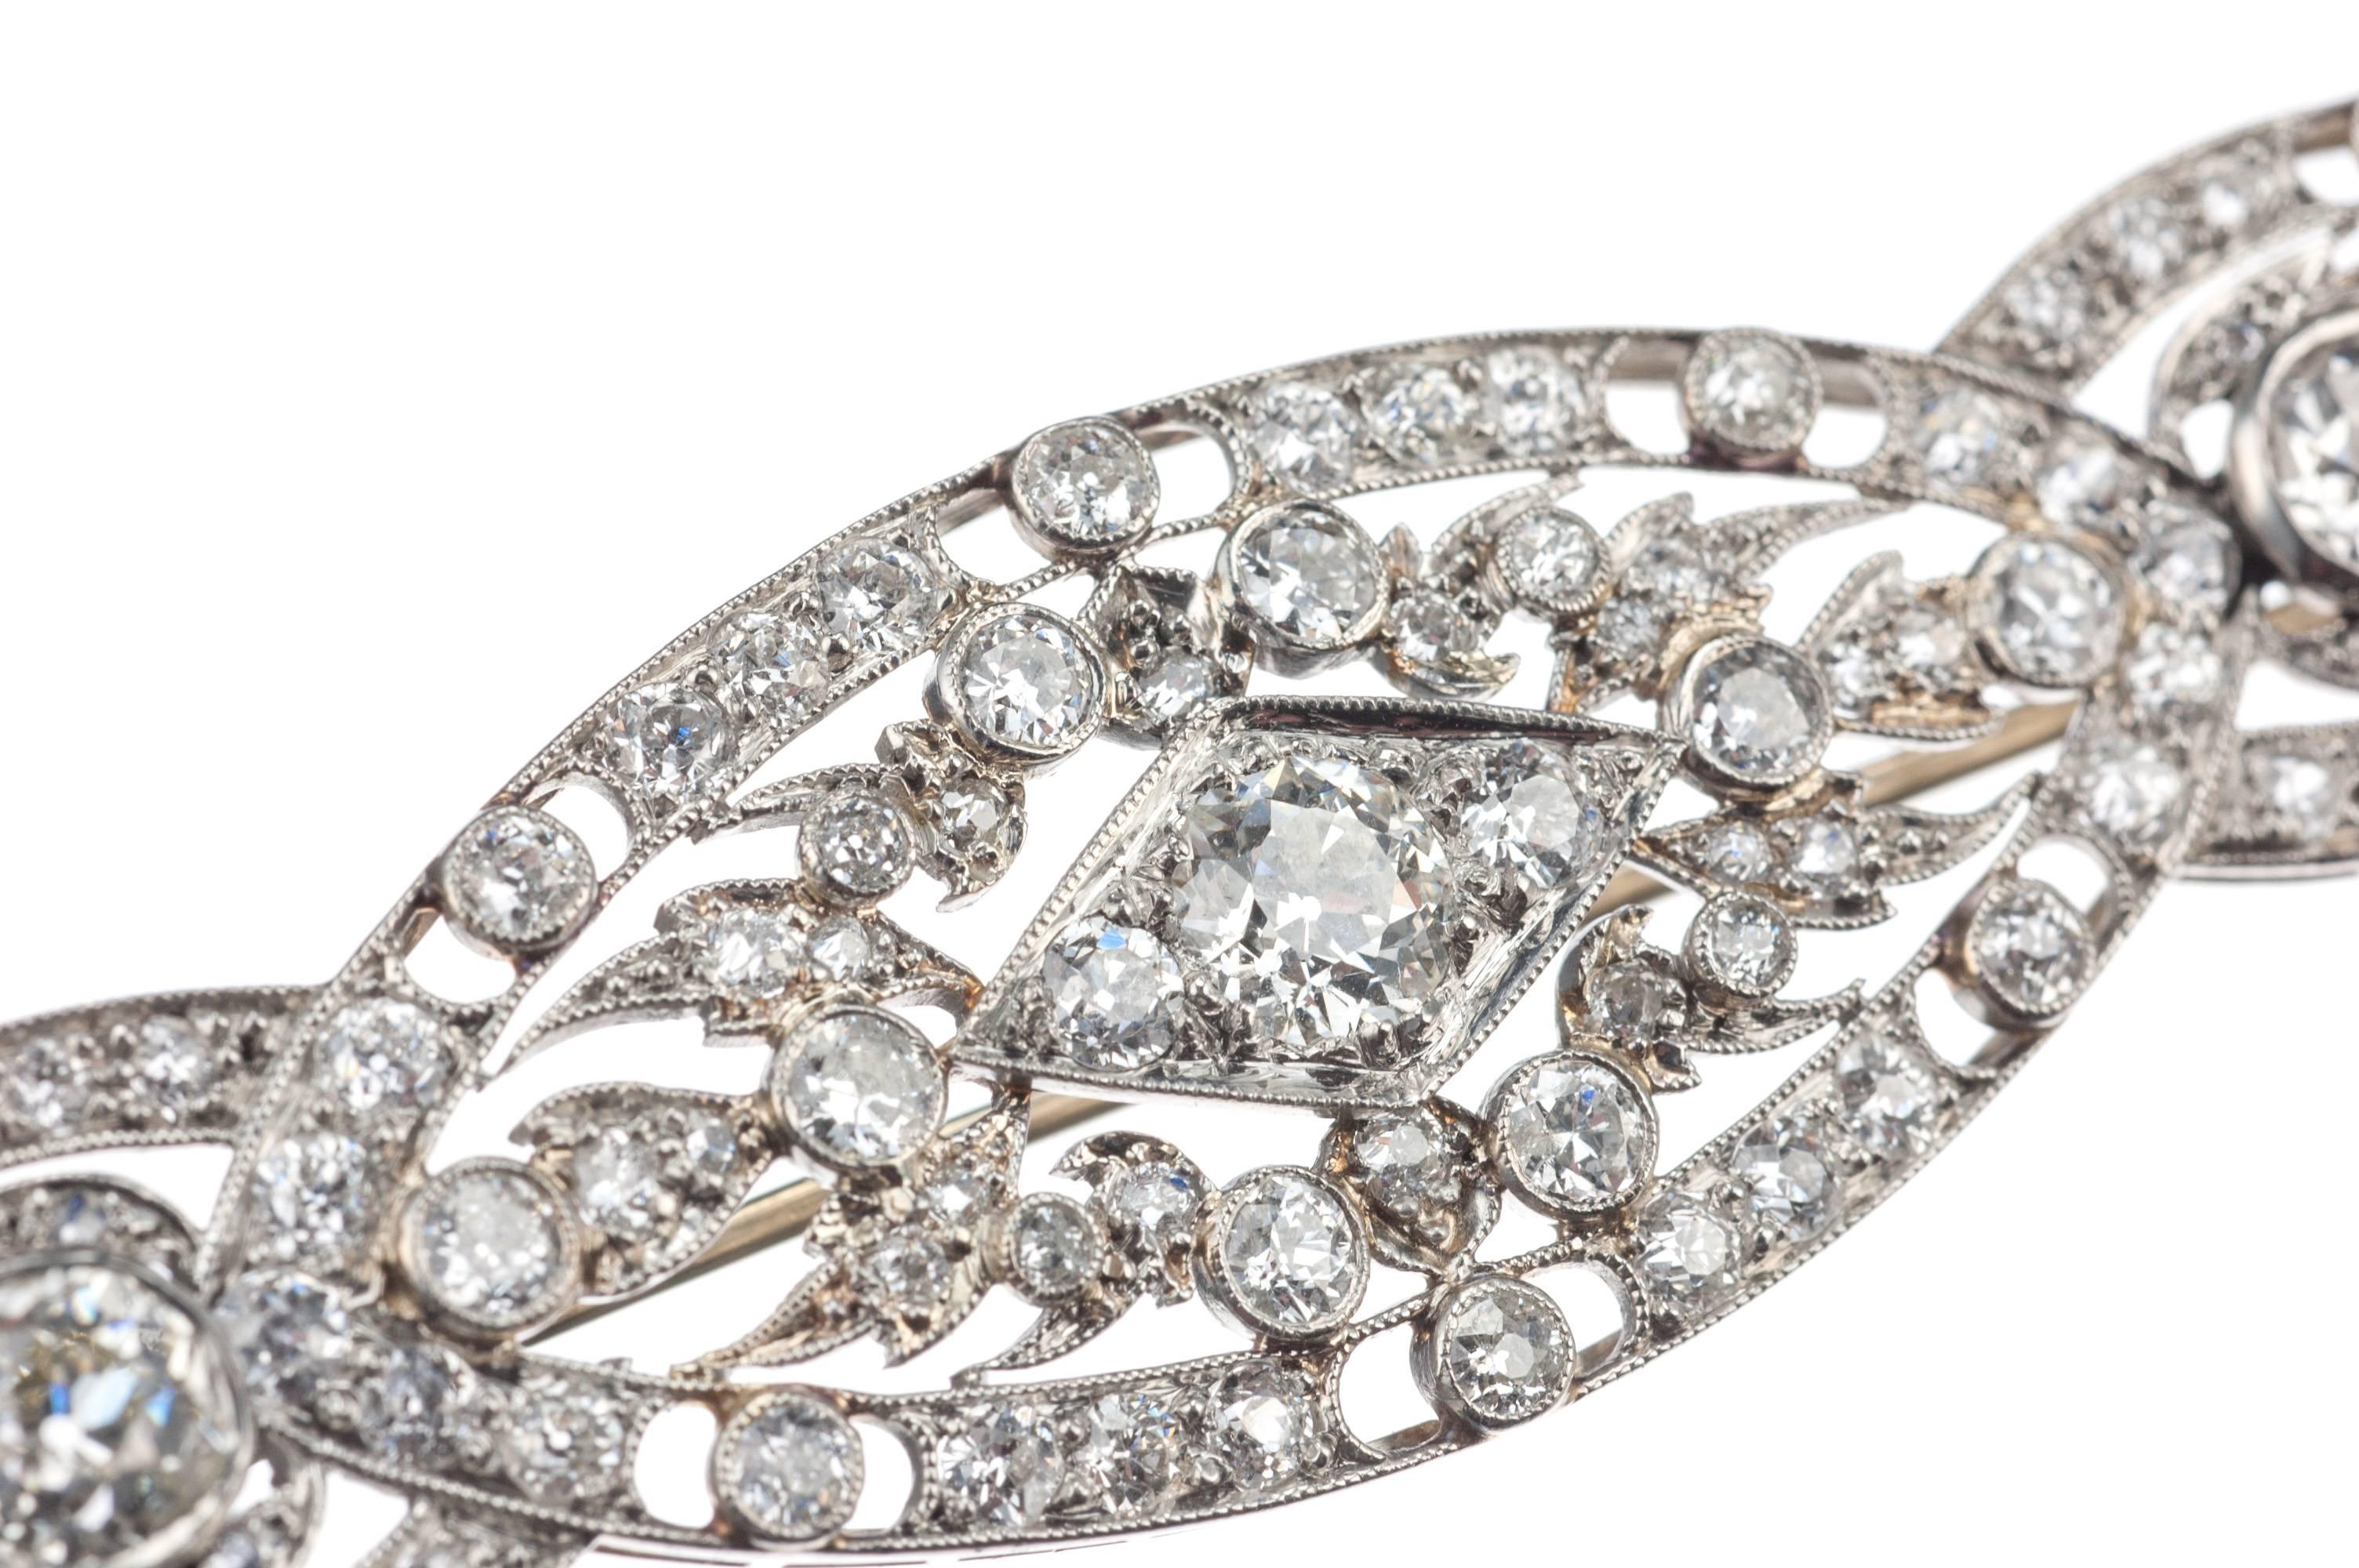 A classic art deco diamond brooch fashioned in platinum. Three old mine cut diamonds, approx. 1.63ctw of H-I color and VS clarity, feature as prominent centerpieces accented by 90 European and Old Mine cut diamonds, approx. 2.30ctw. of H-I color and